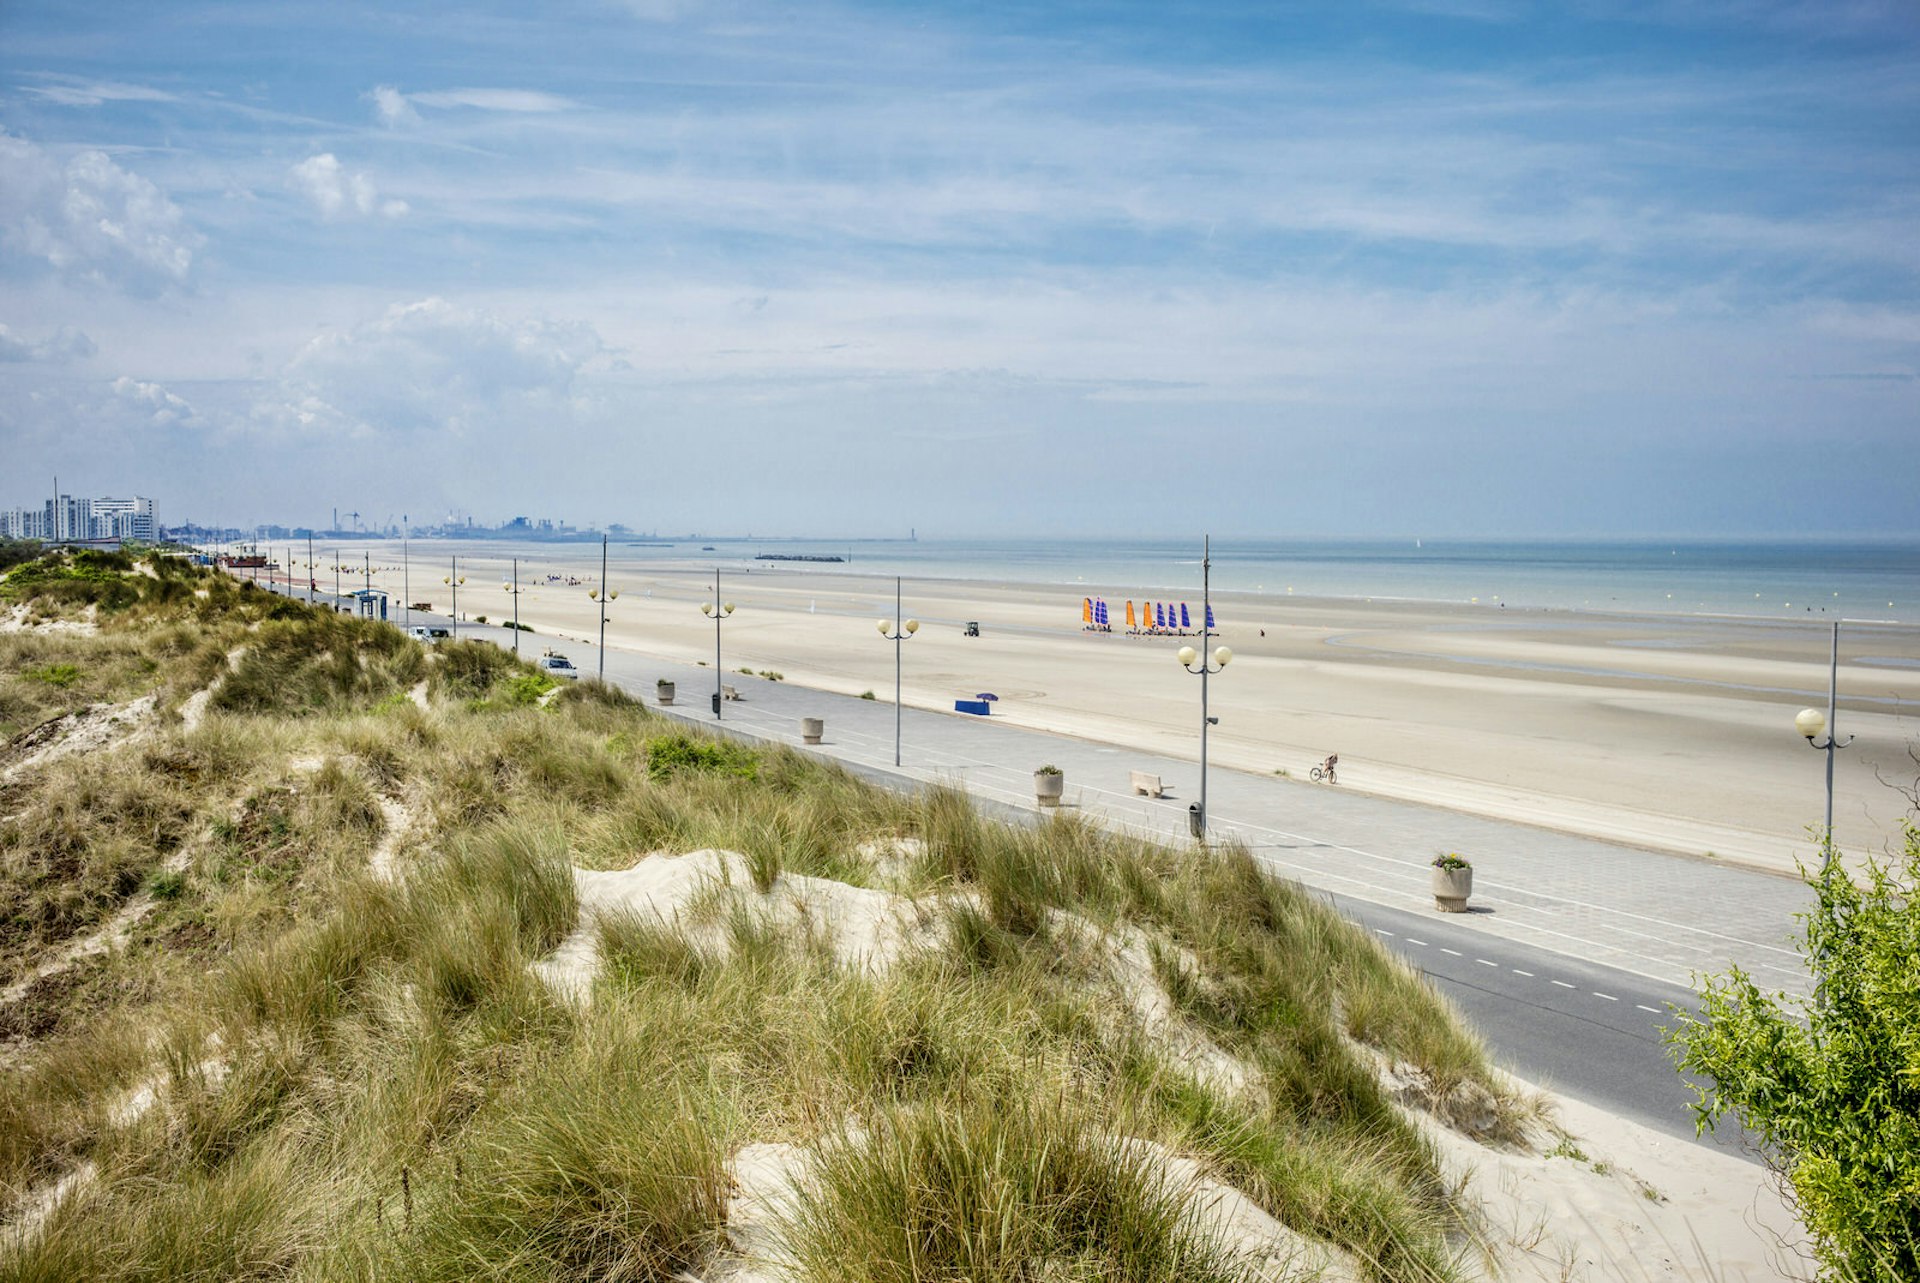 Malo-les-Bains beach in Dunkirk, France © Roy JAMES Shakespeare / Getty Images